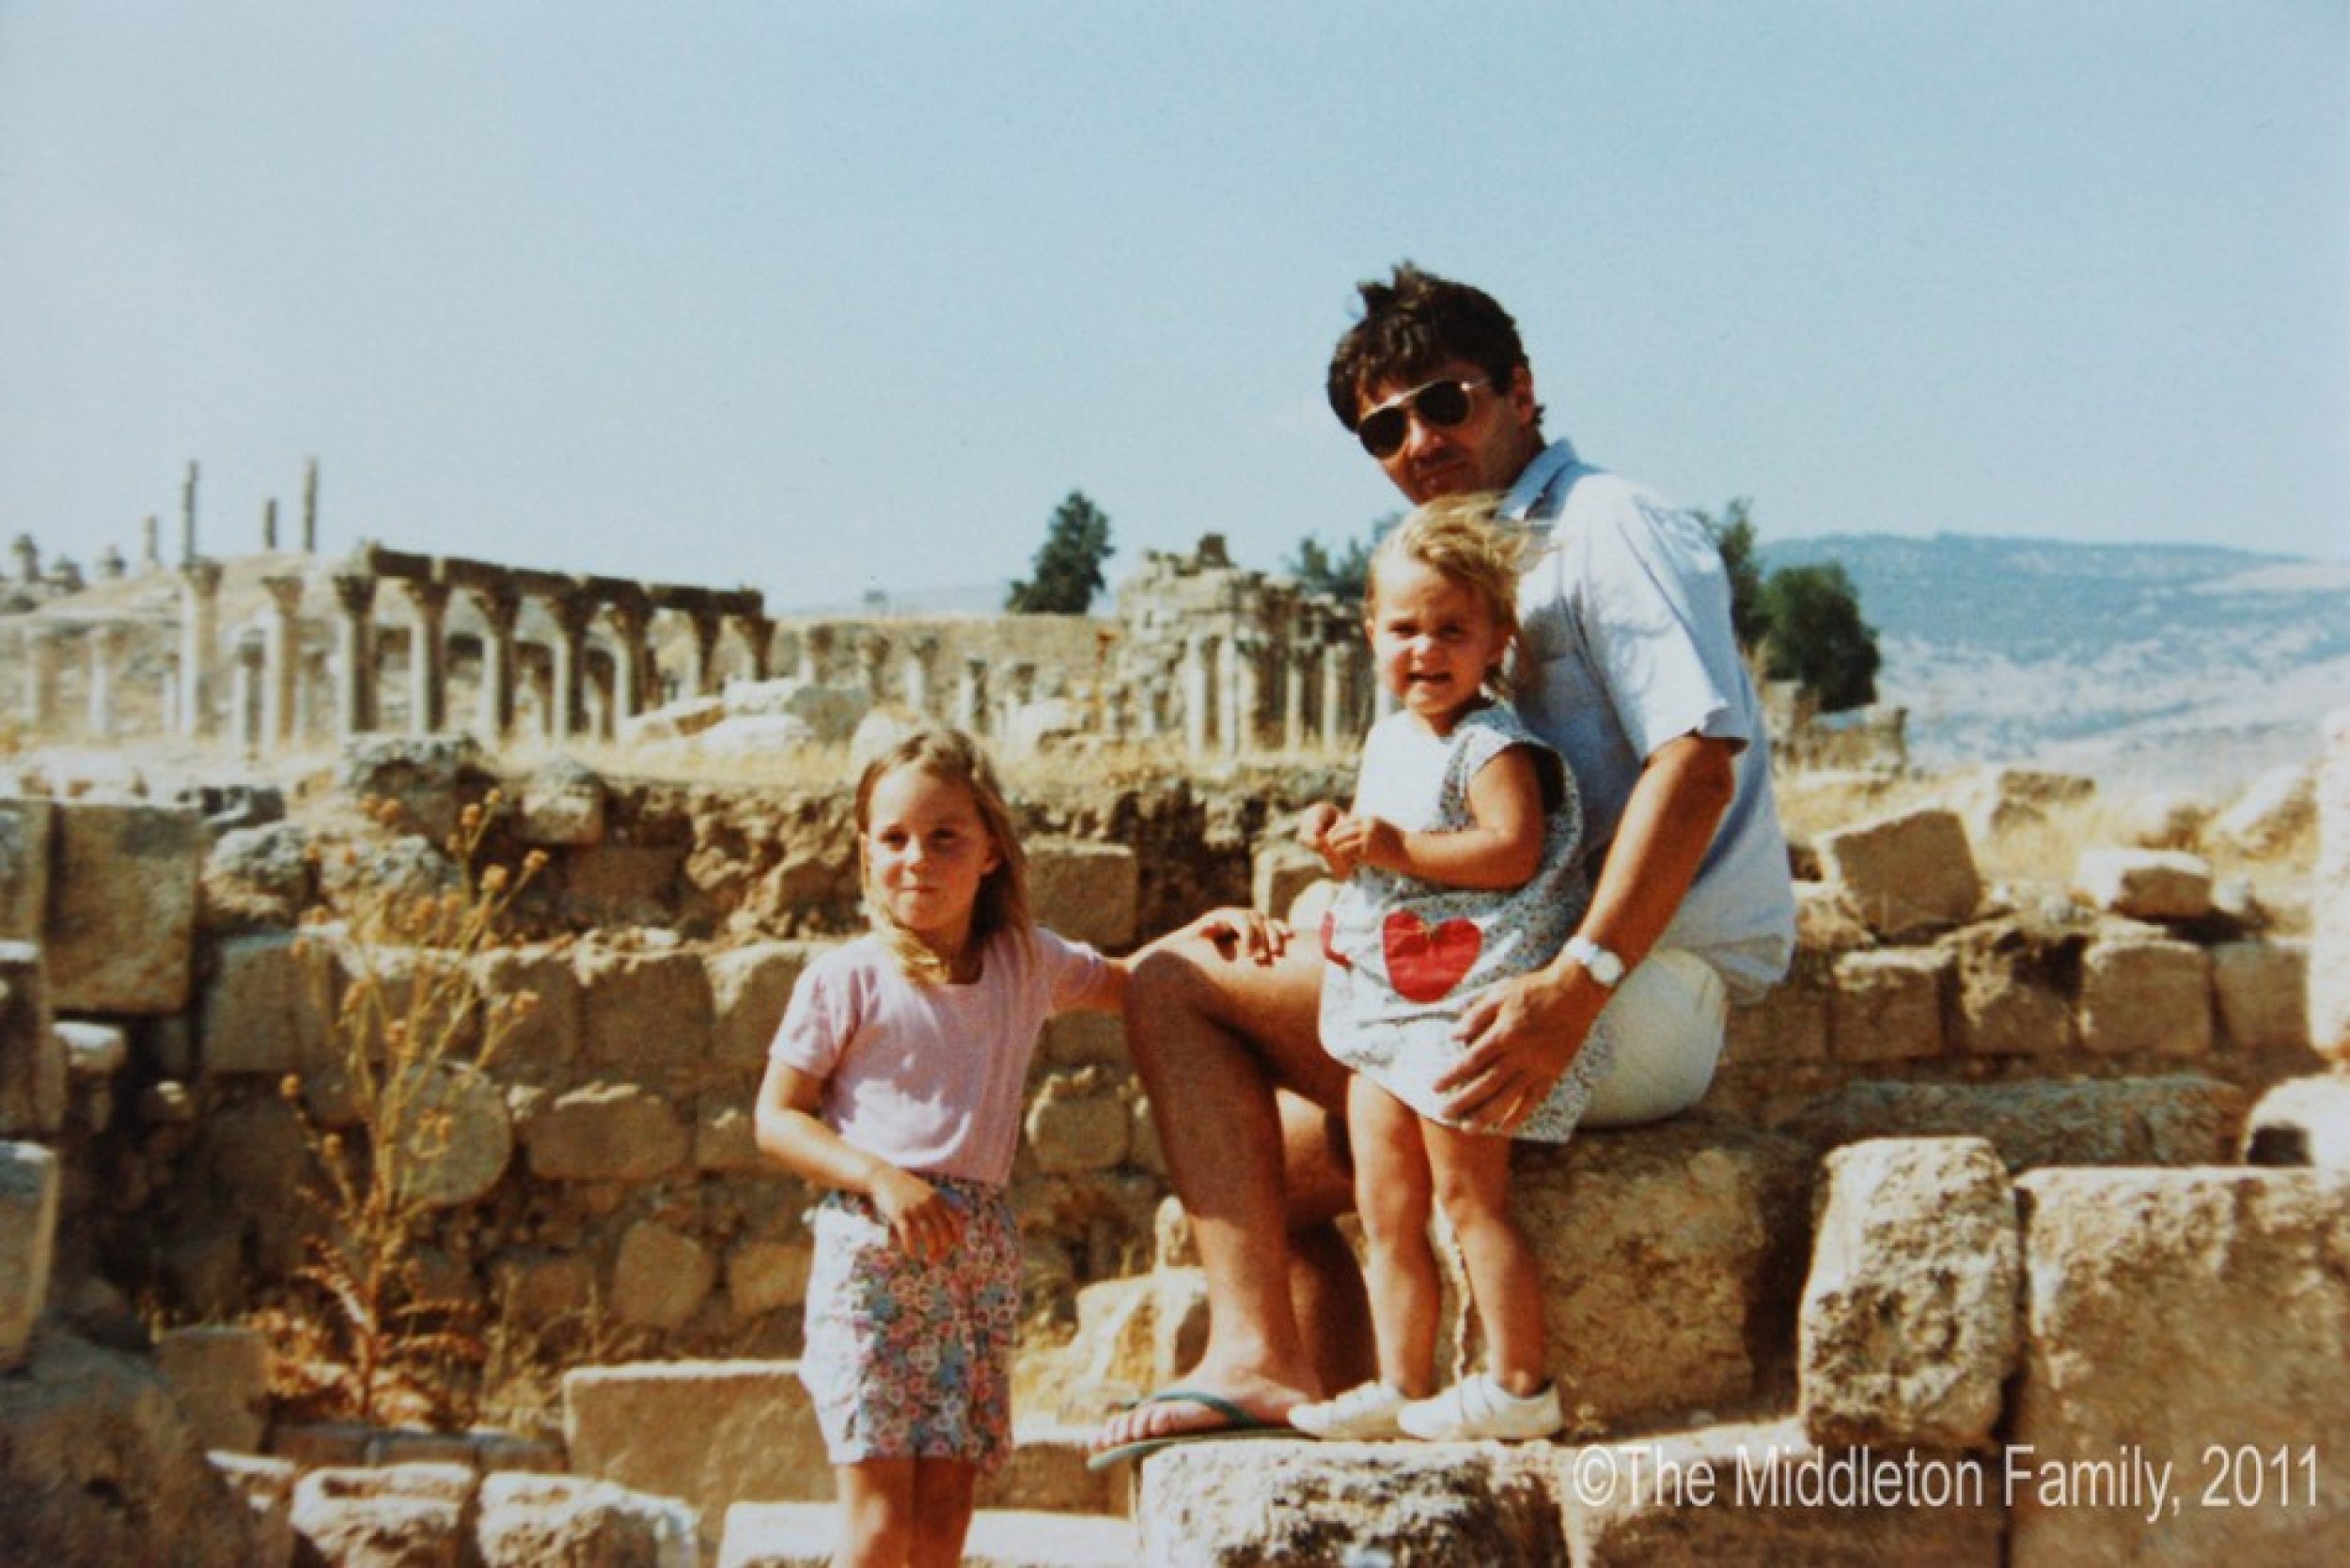 Kate Catherine aged four with her father and sister Pippa in Jerash, Jordan.